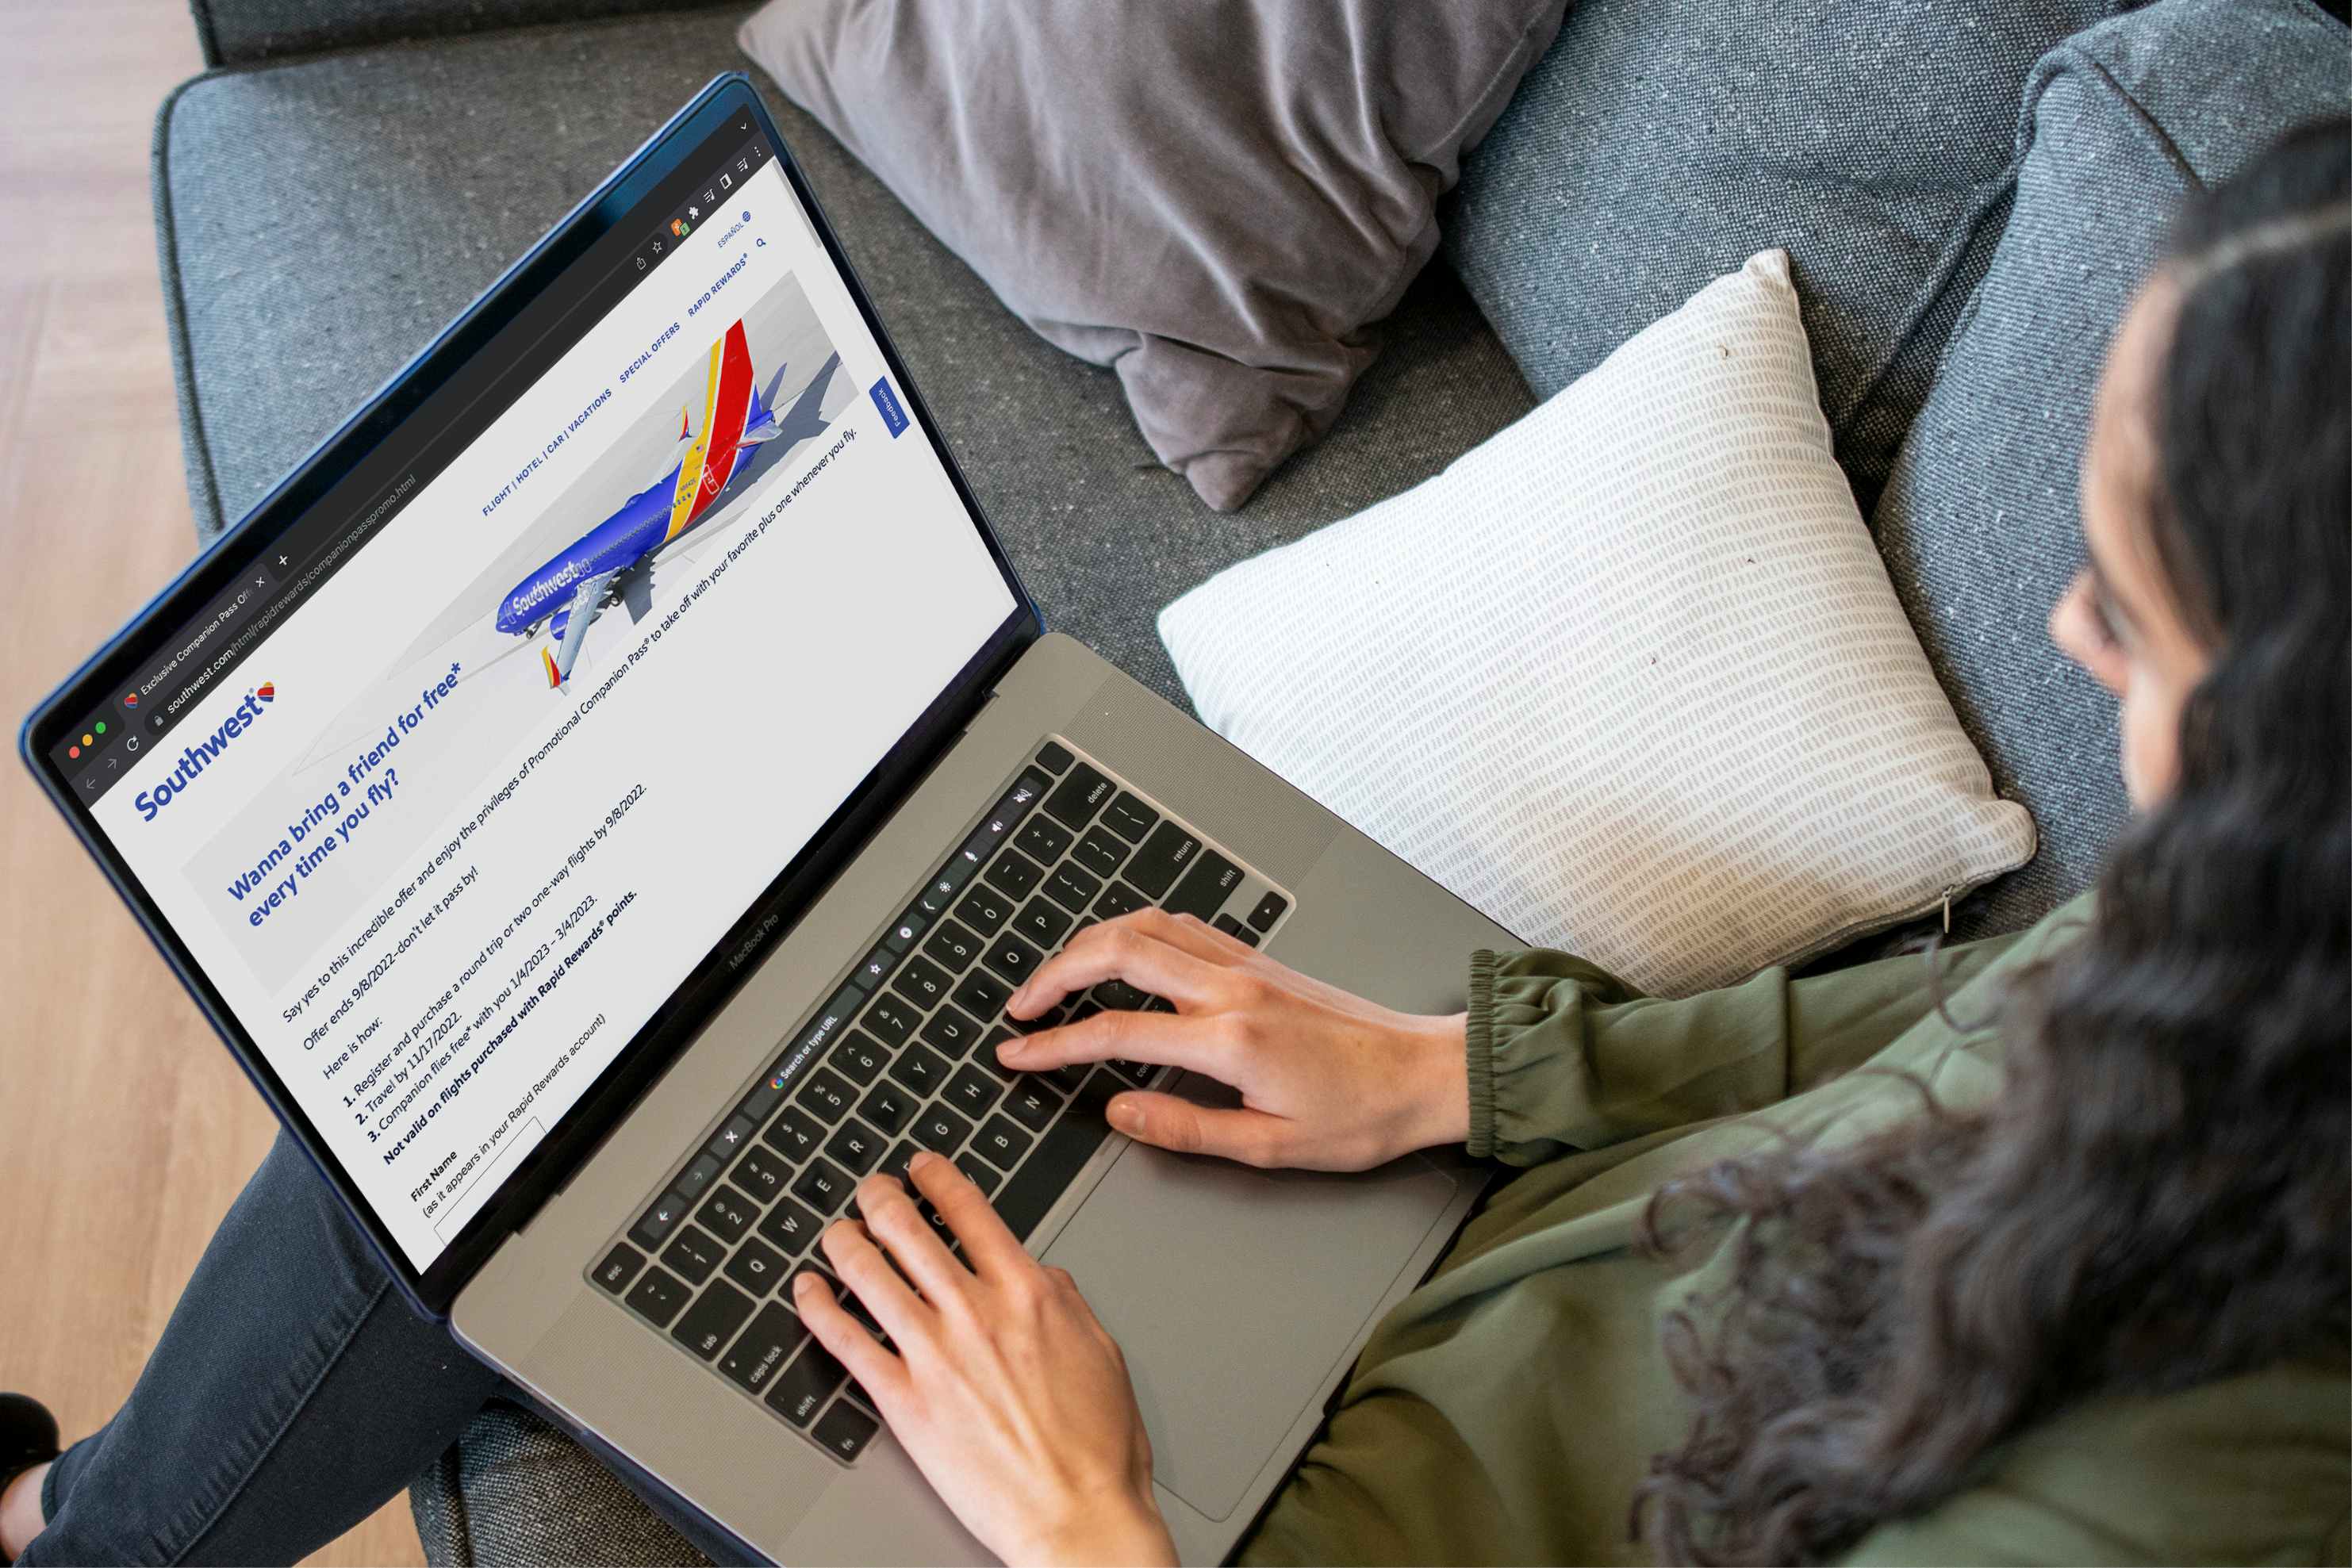 A person using a laptop displaying the Southwest Airline website's page for Free Companion Pass.